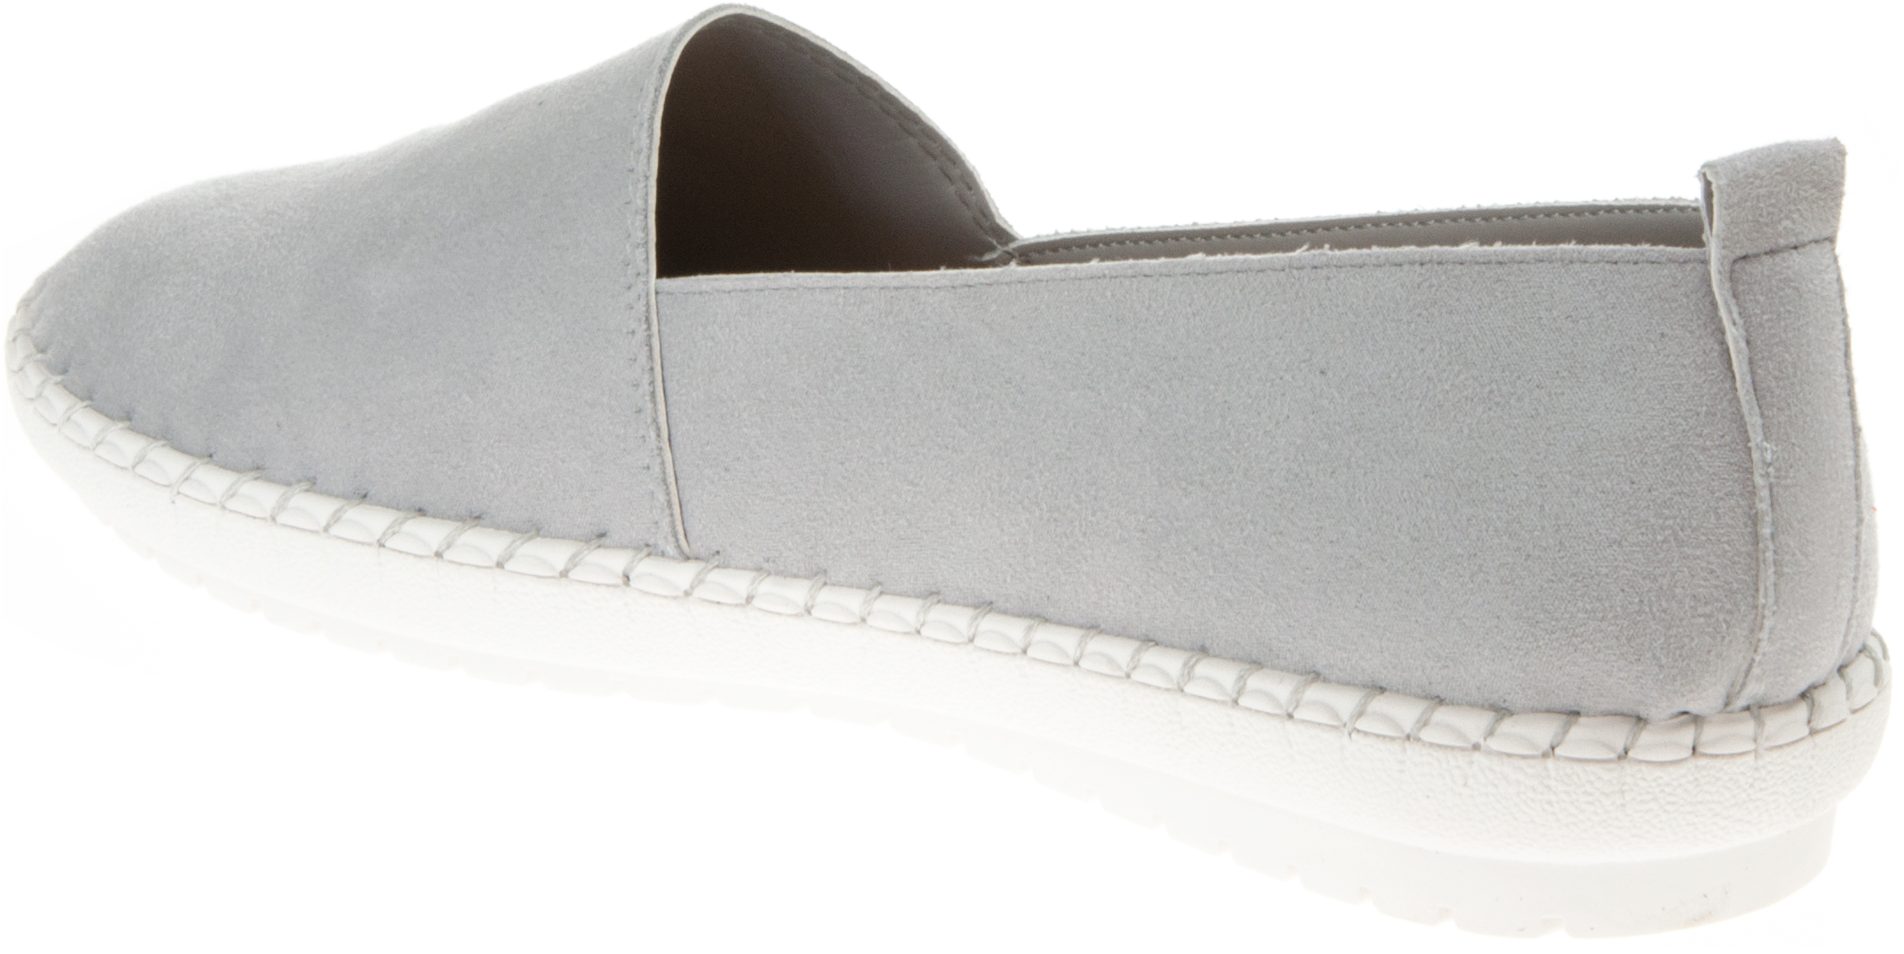 Lunar Bliss Grey JLY145 GR - Everyday Shoes - Humphries Shoes